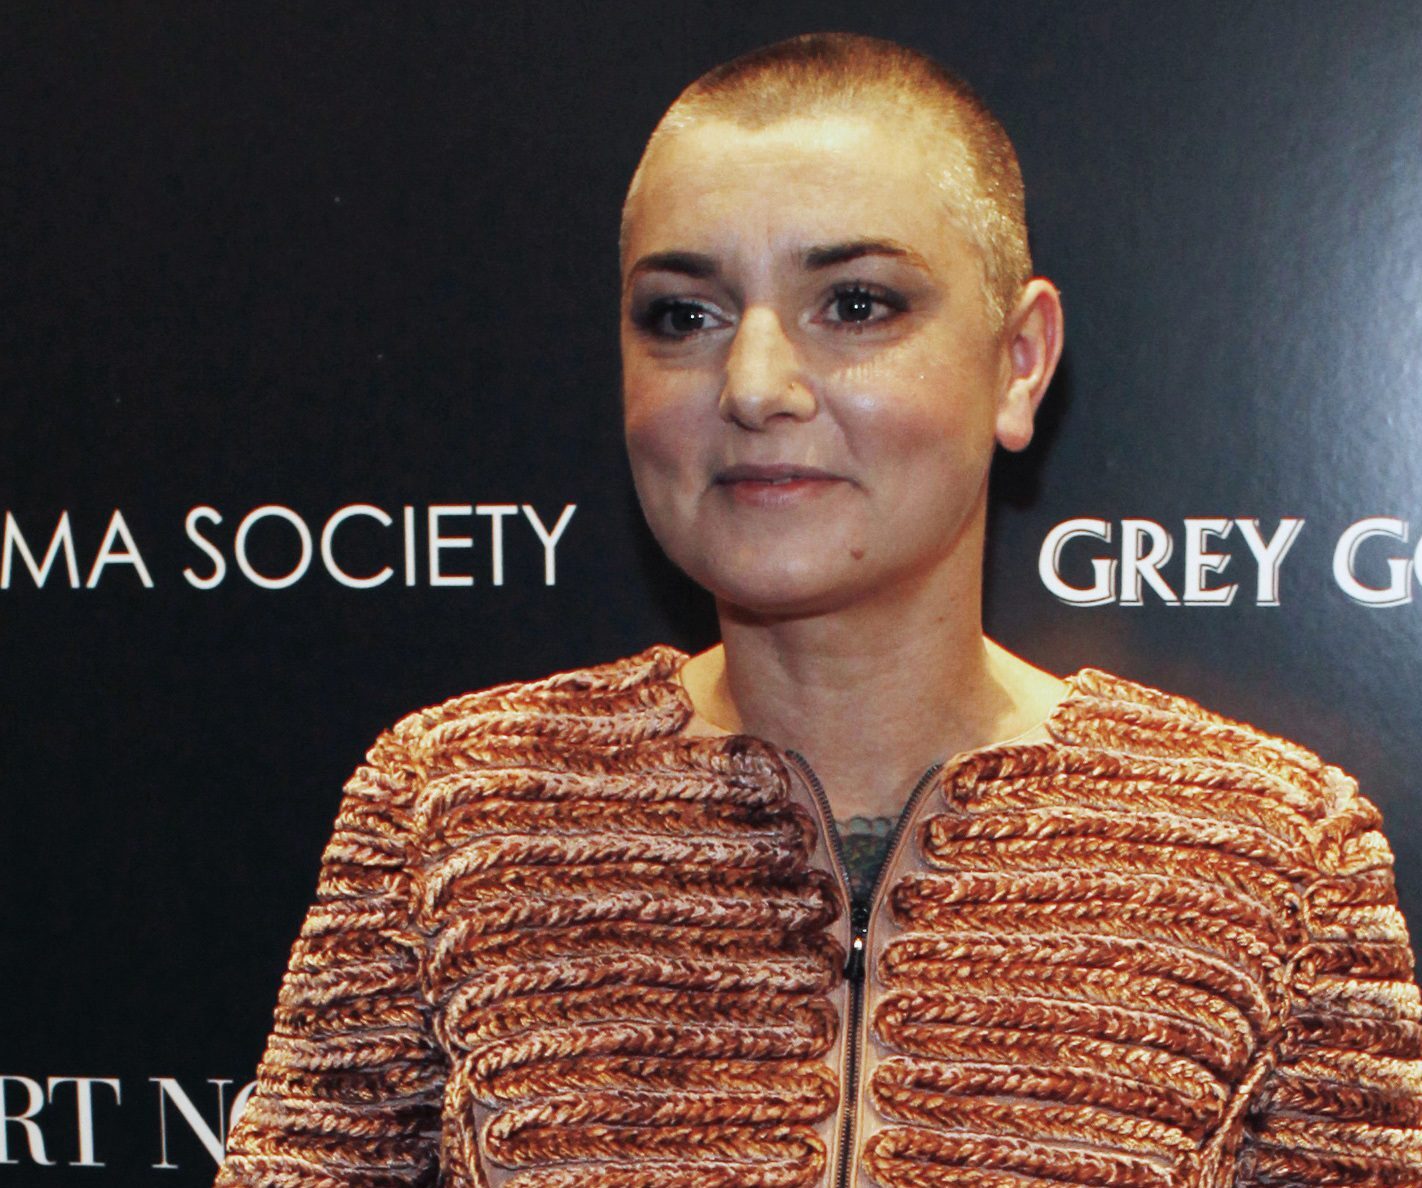 Singer Sinead O'Connor attends the Giorgio Armani and the Cinema Society screening of the film "Albert Nobbs" at the Museum of Modern Art in New York December 13, 2011. REUTERS/Eduardo Munoz/File Photo